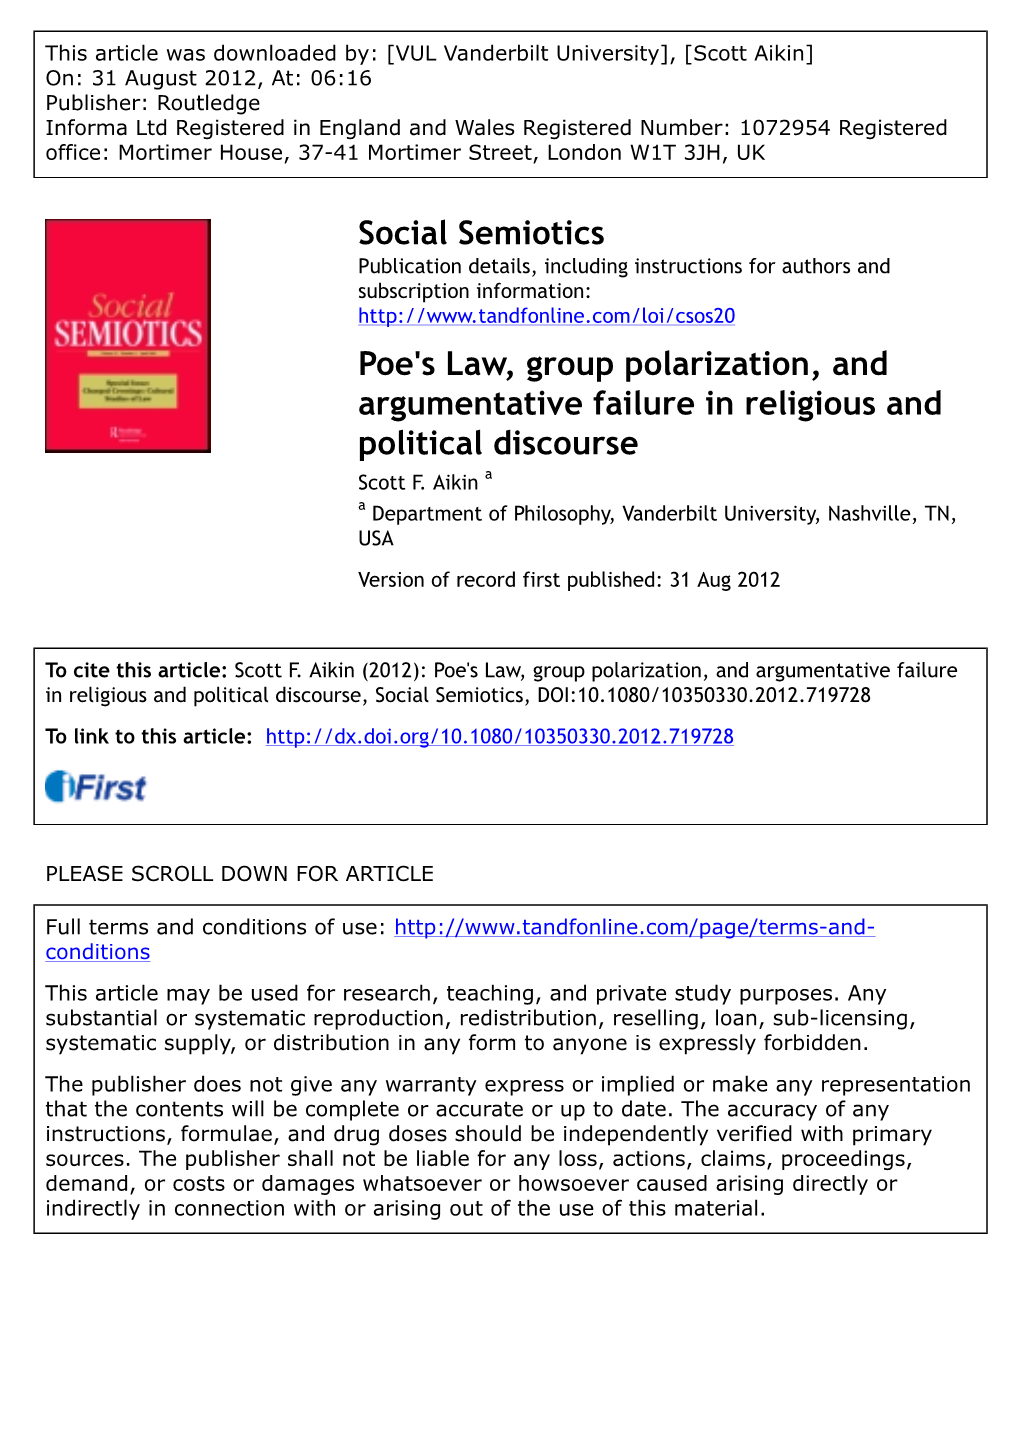 Poe's Law, Group Polarization, and Argumentative Failure in Religious and Political Discourse Scott F